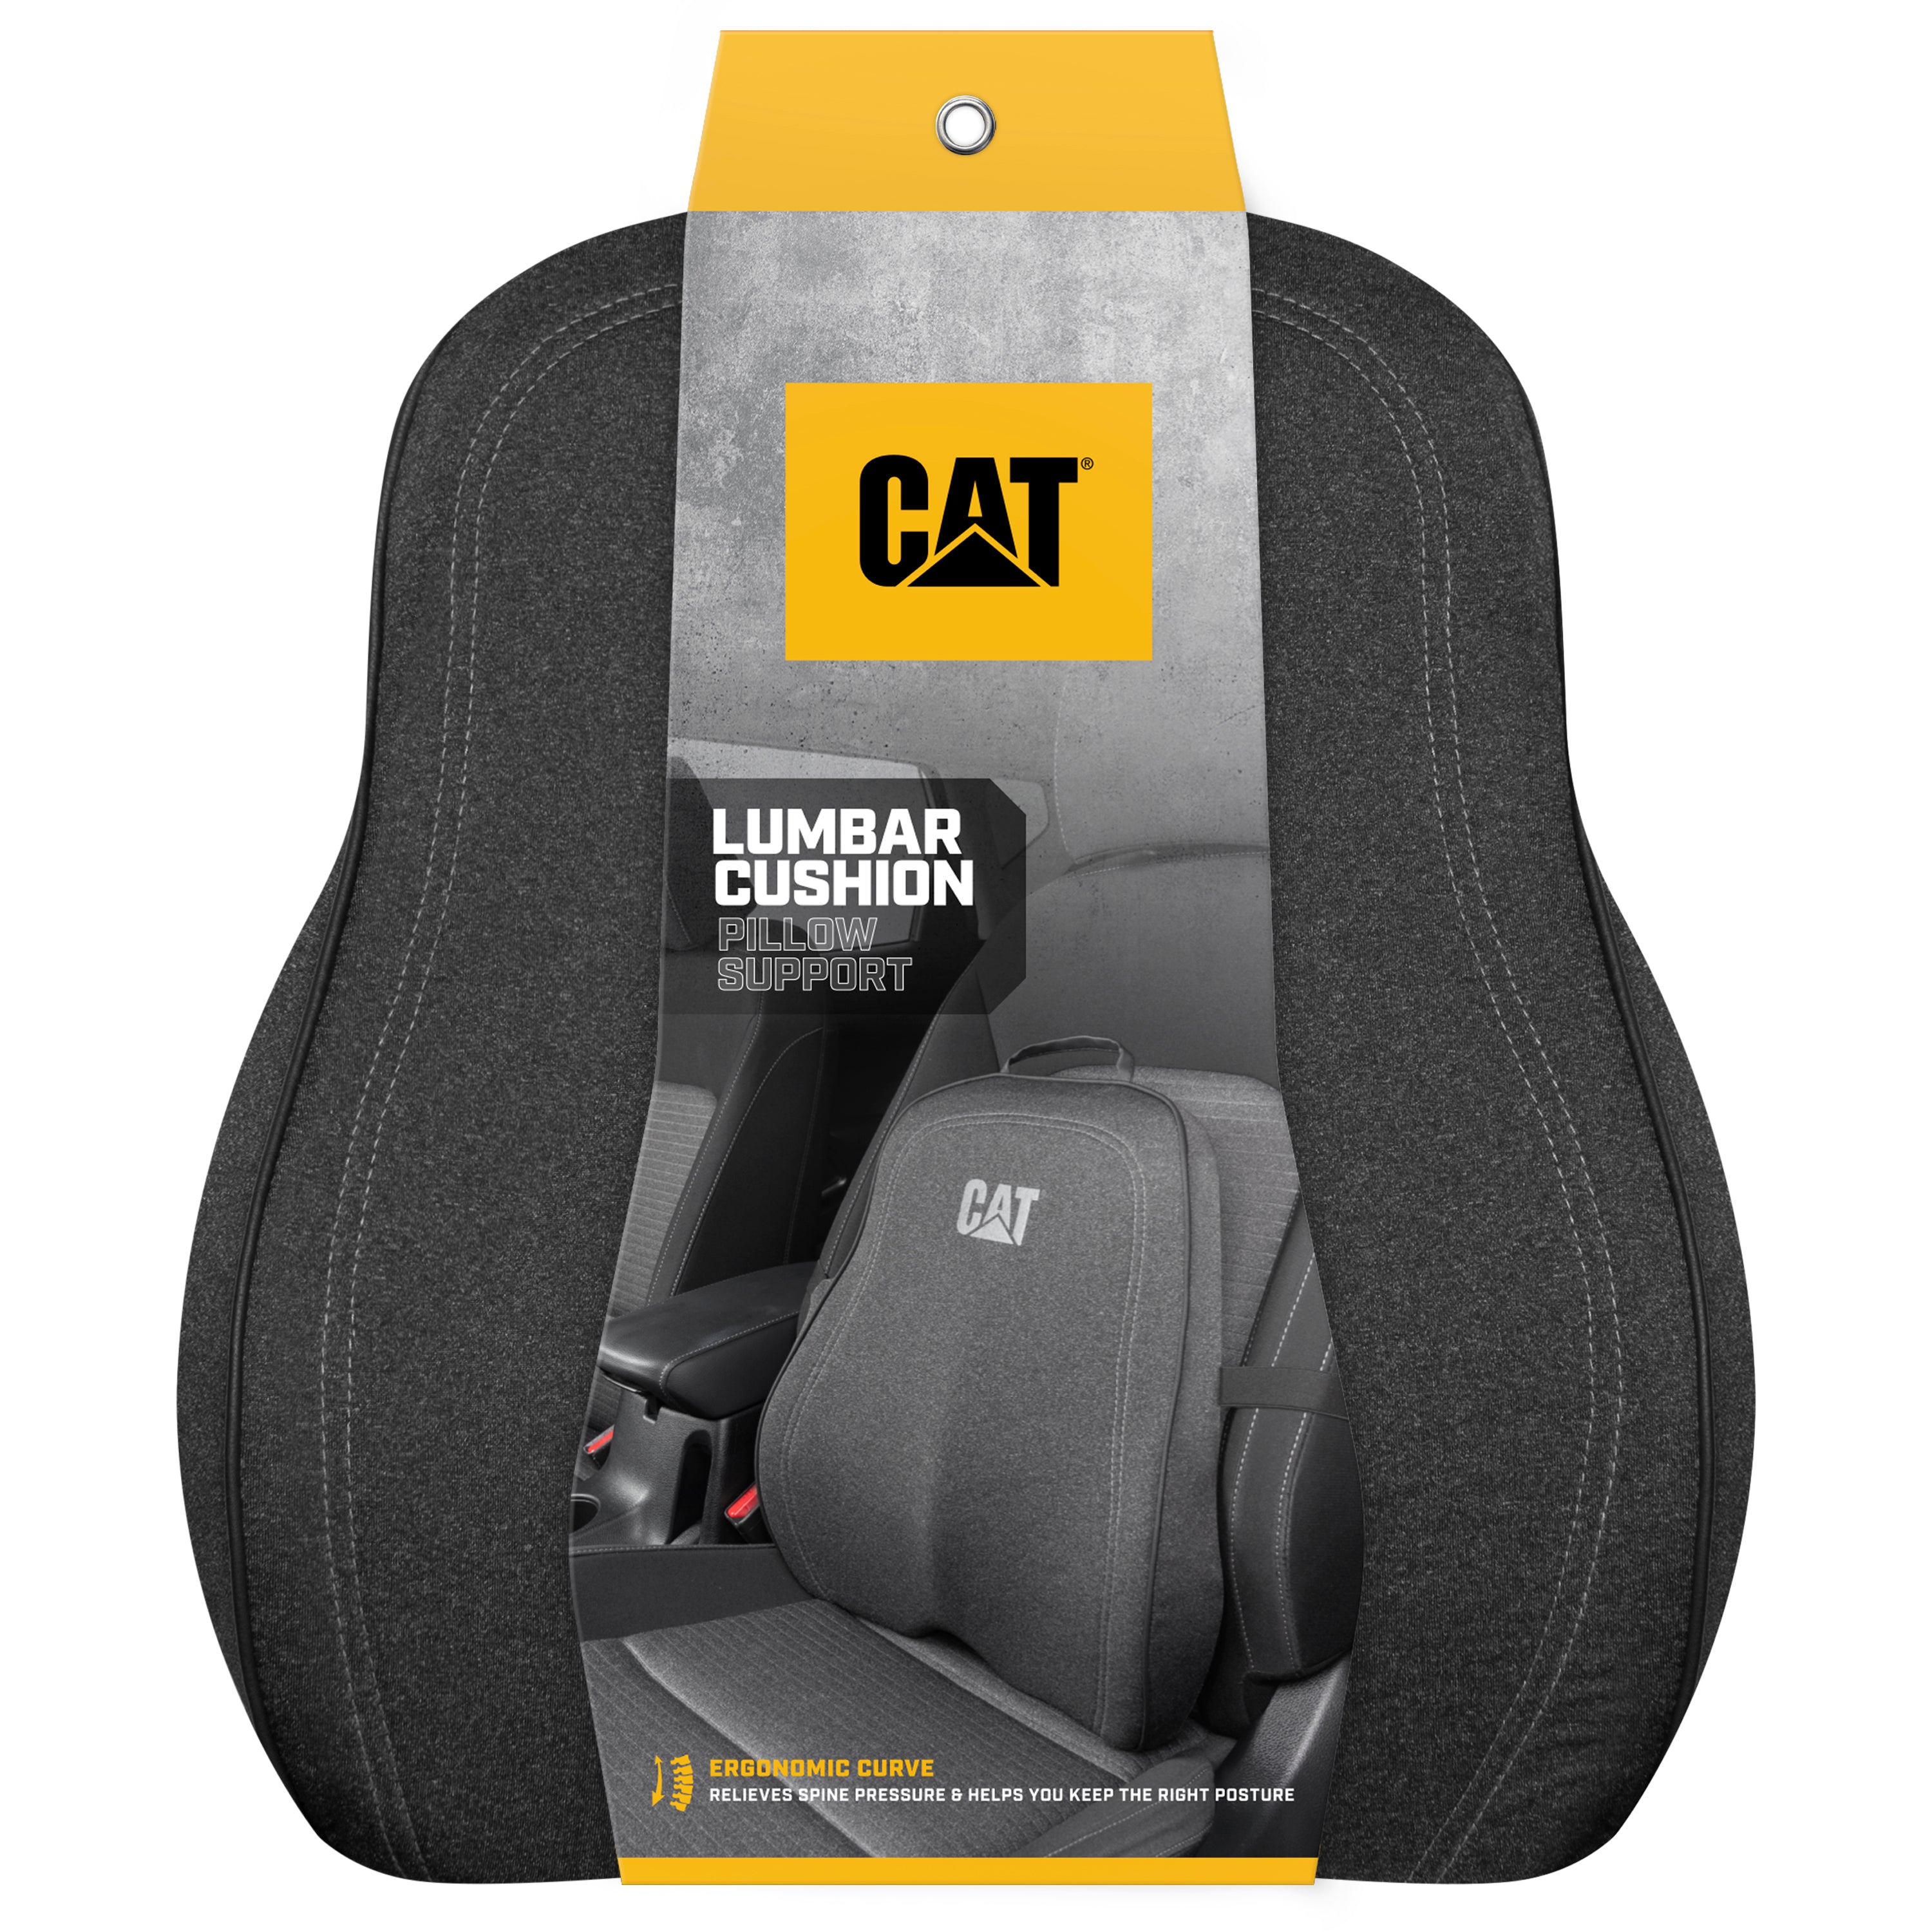 Cat® Big Lumbar Support Cushion for Cars Trucks SUVs - Ergonomic Back Support for Comfortable Driving